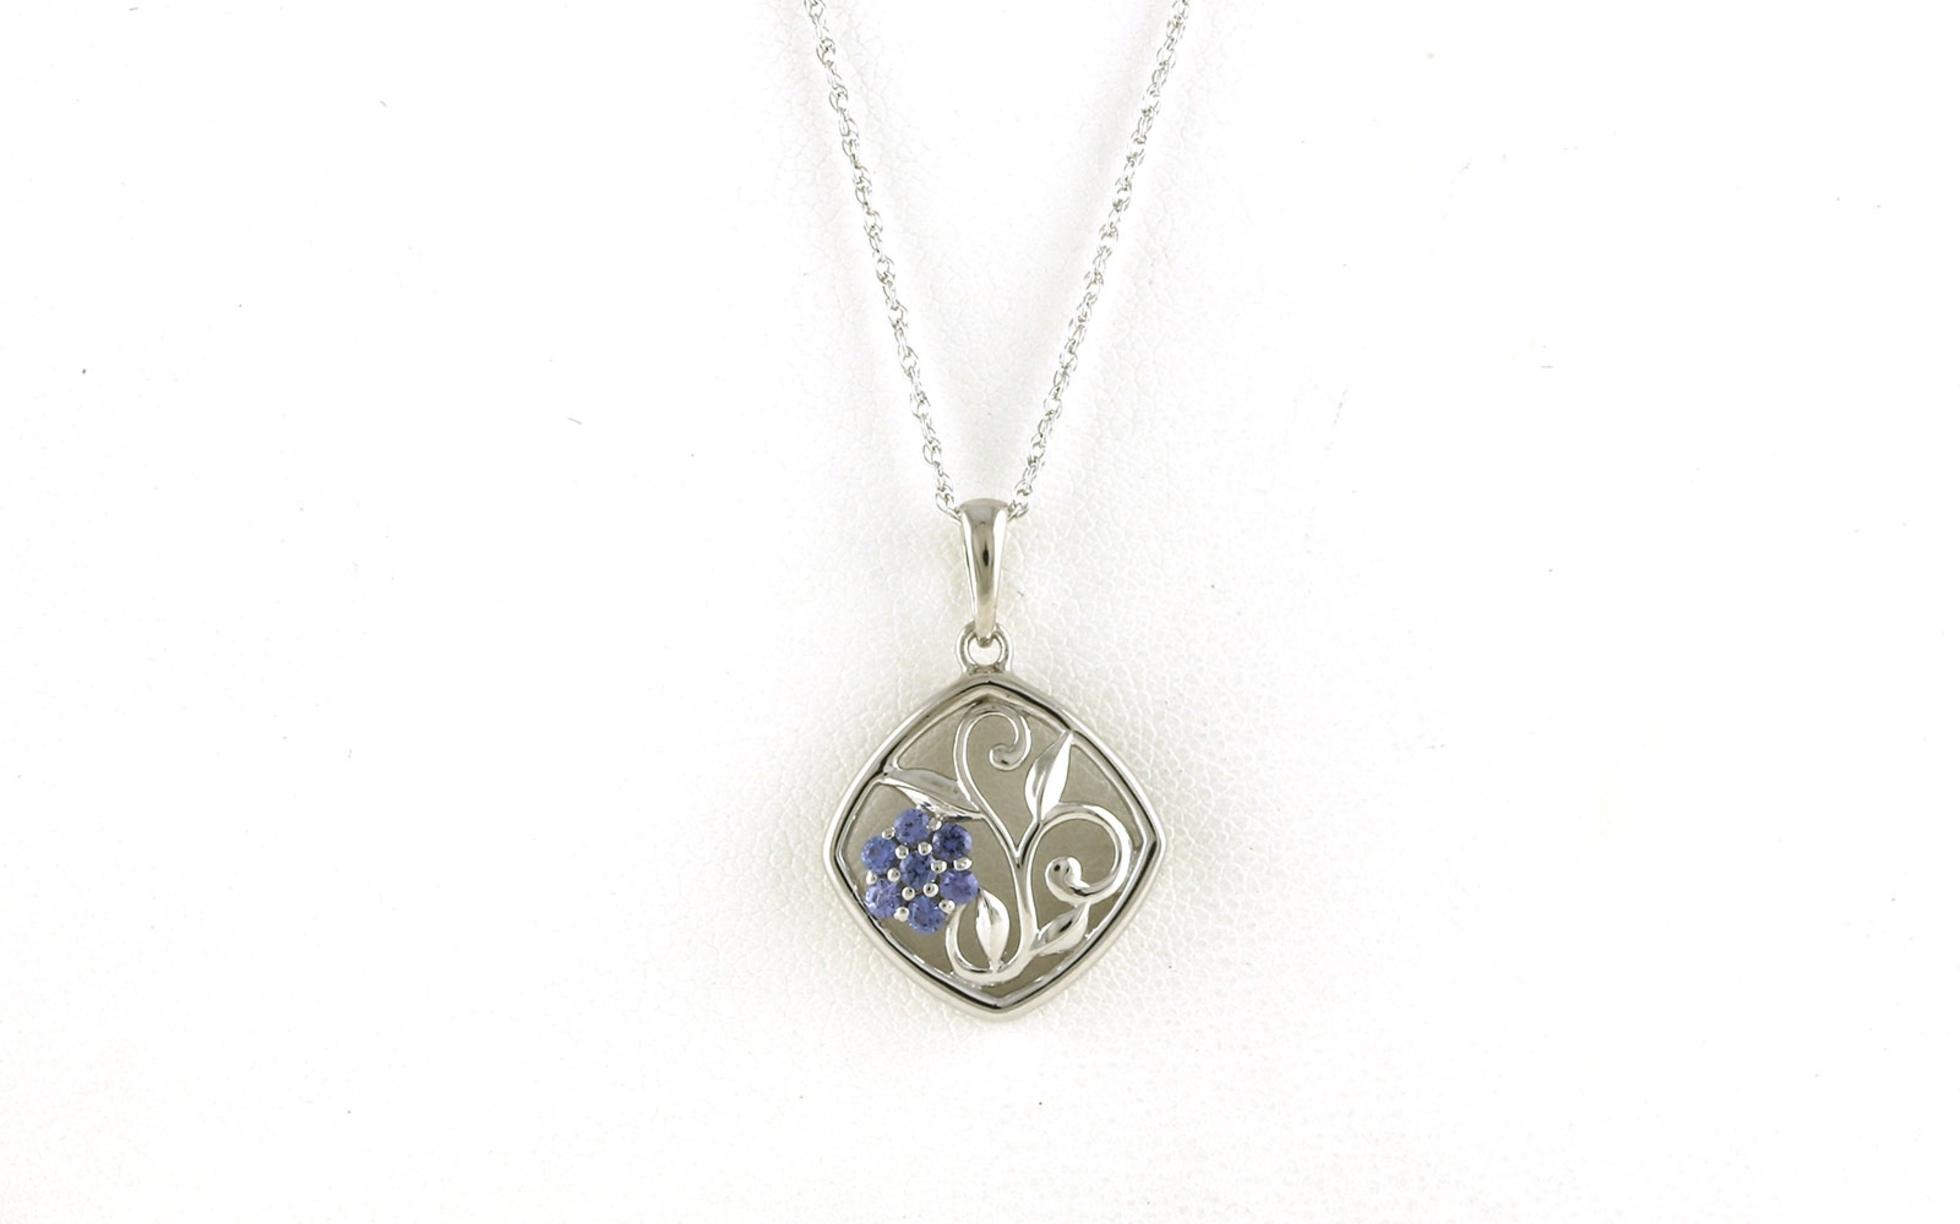 7-Stone Flower Cluster Montana Yogo Sapphire Necklace in Sterling Silver (0.21cts TWT)